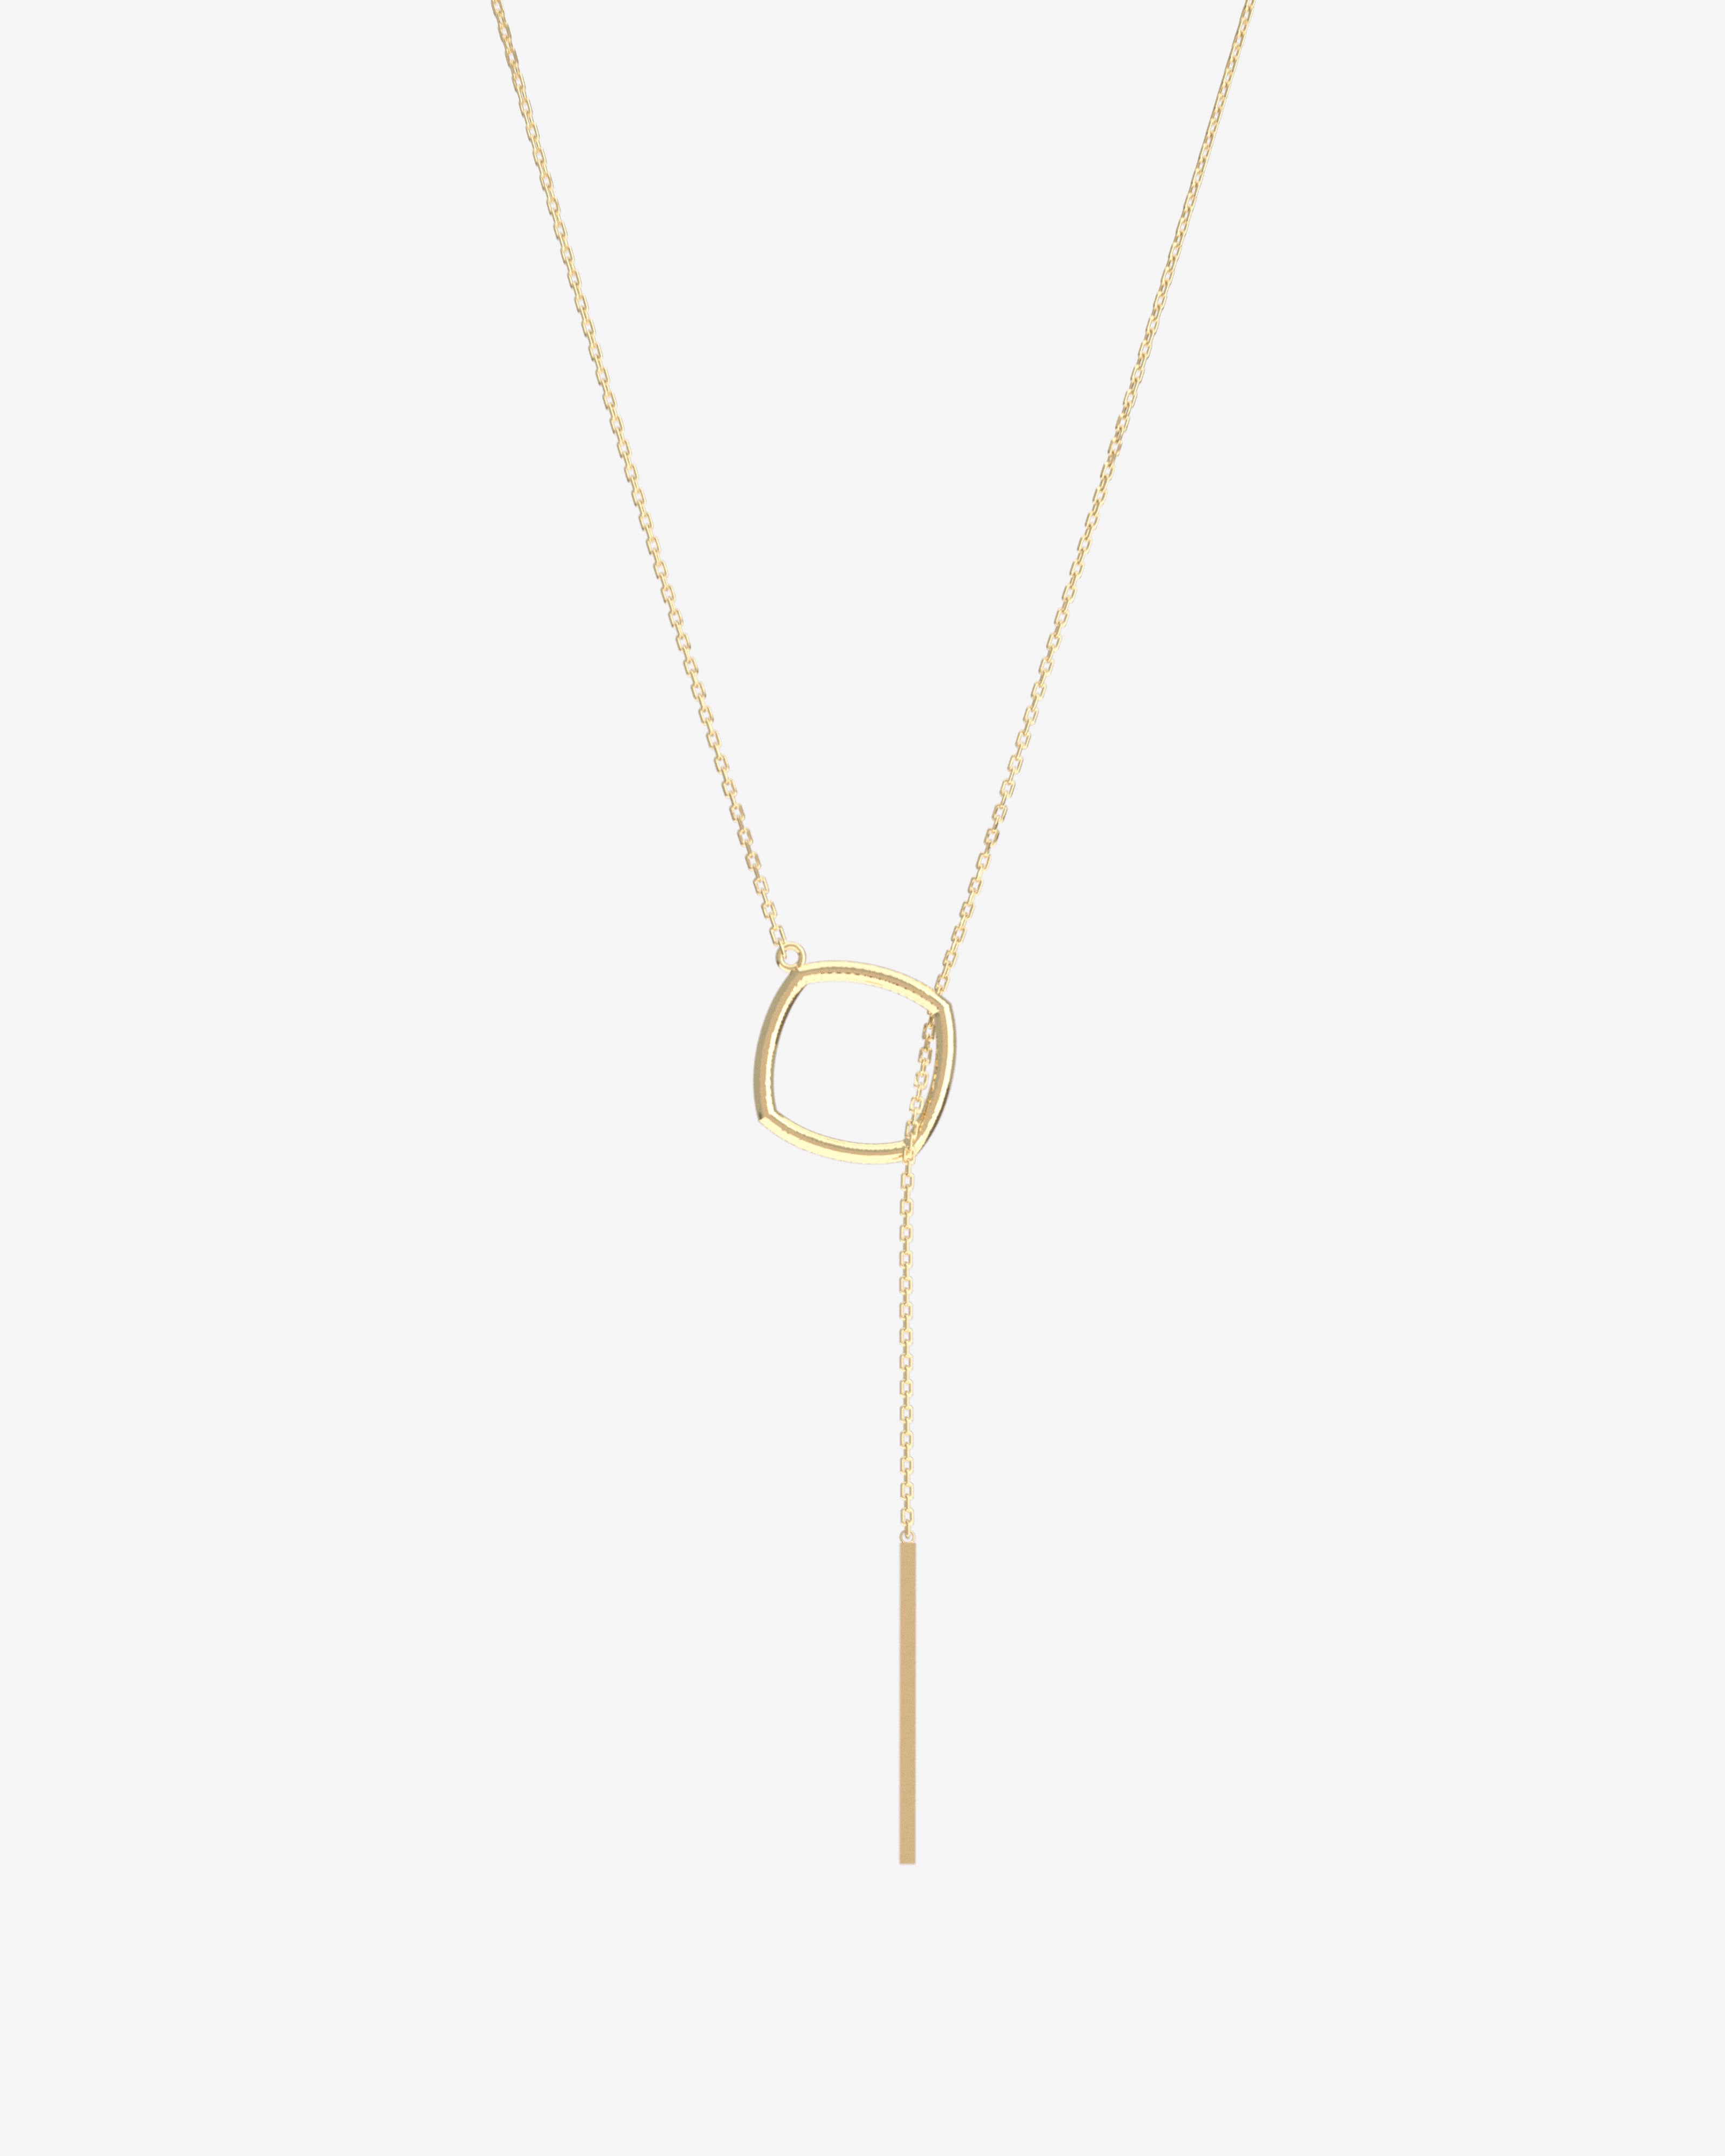 SOLID-YELLOW-GOLD-ACCENT-NECKLACE-SENER-BESIM